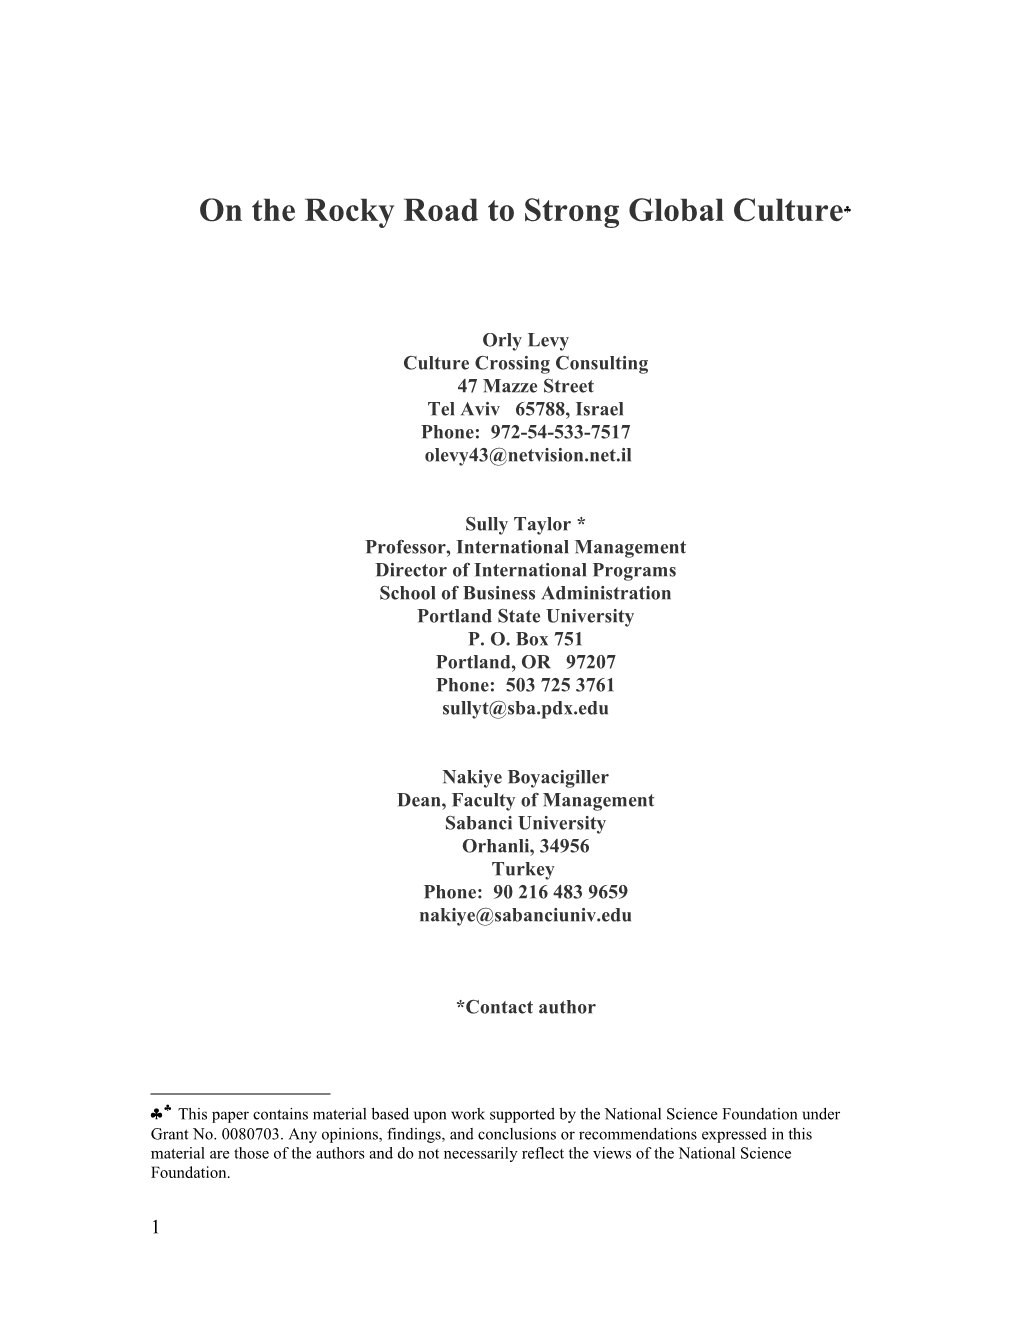 On the Rocky Road to Strong Global Culture